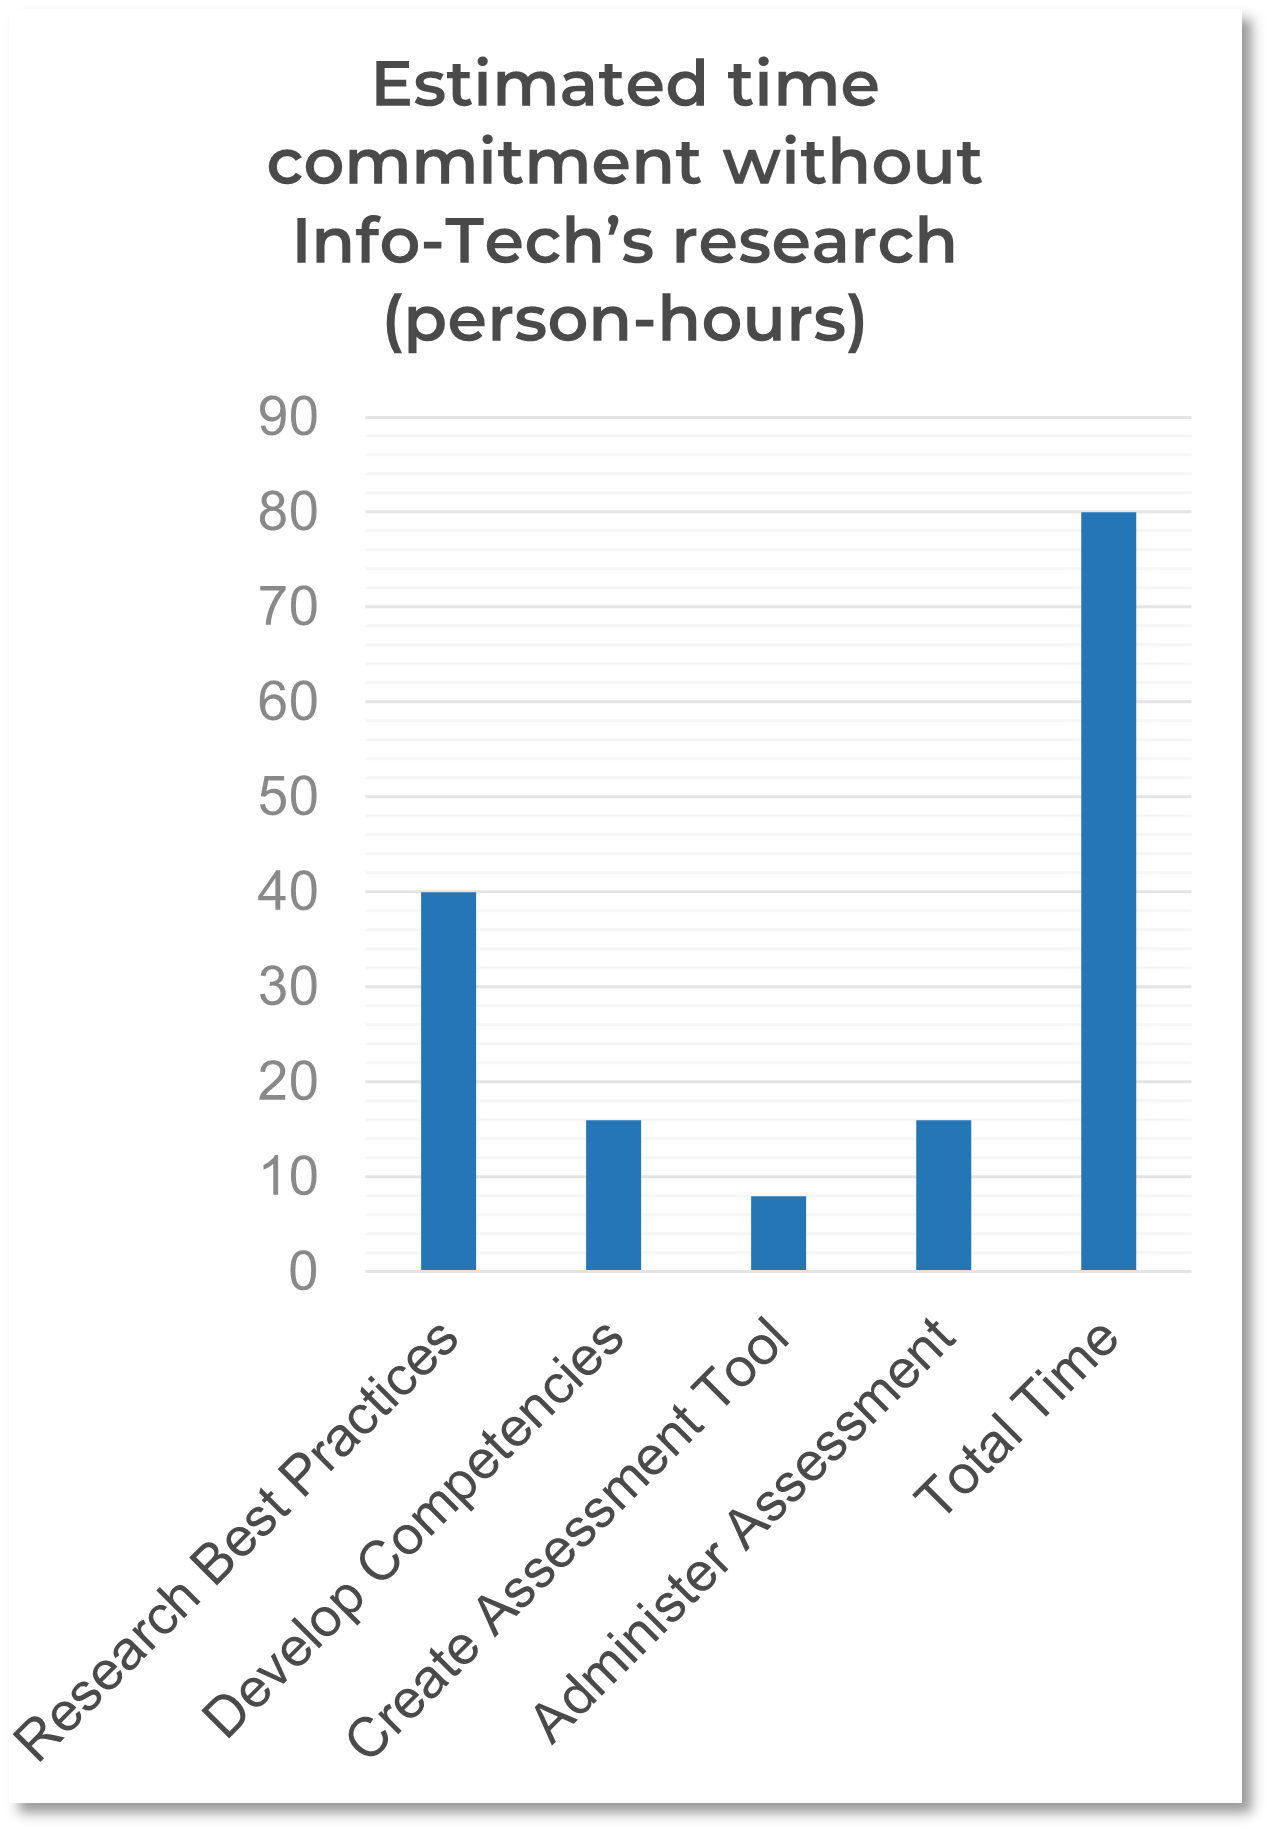 Estimated time commitment without Info-Tech’s research (person-hours)